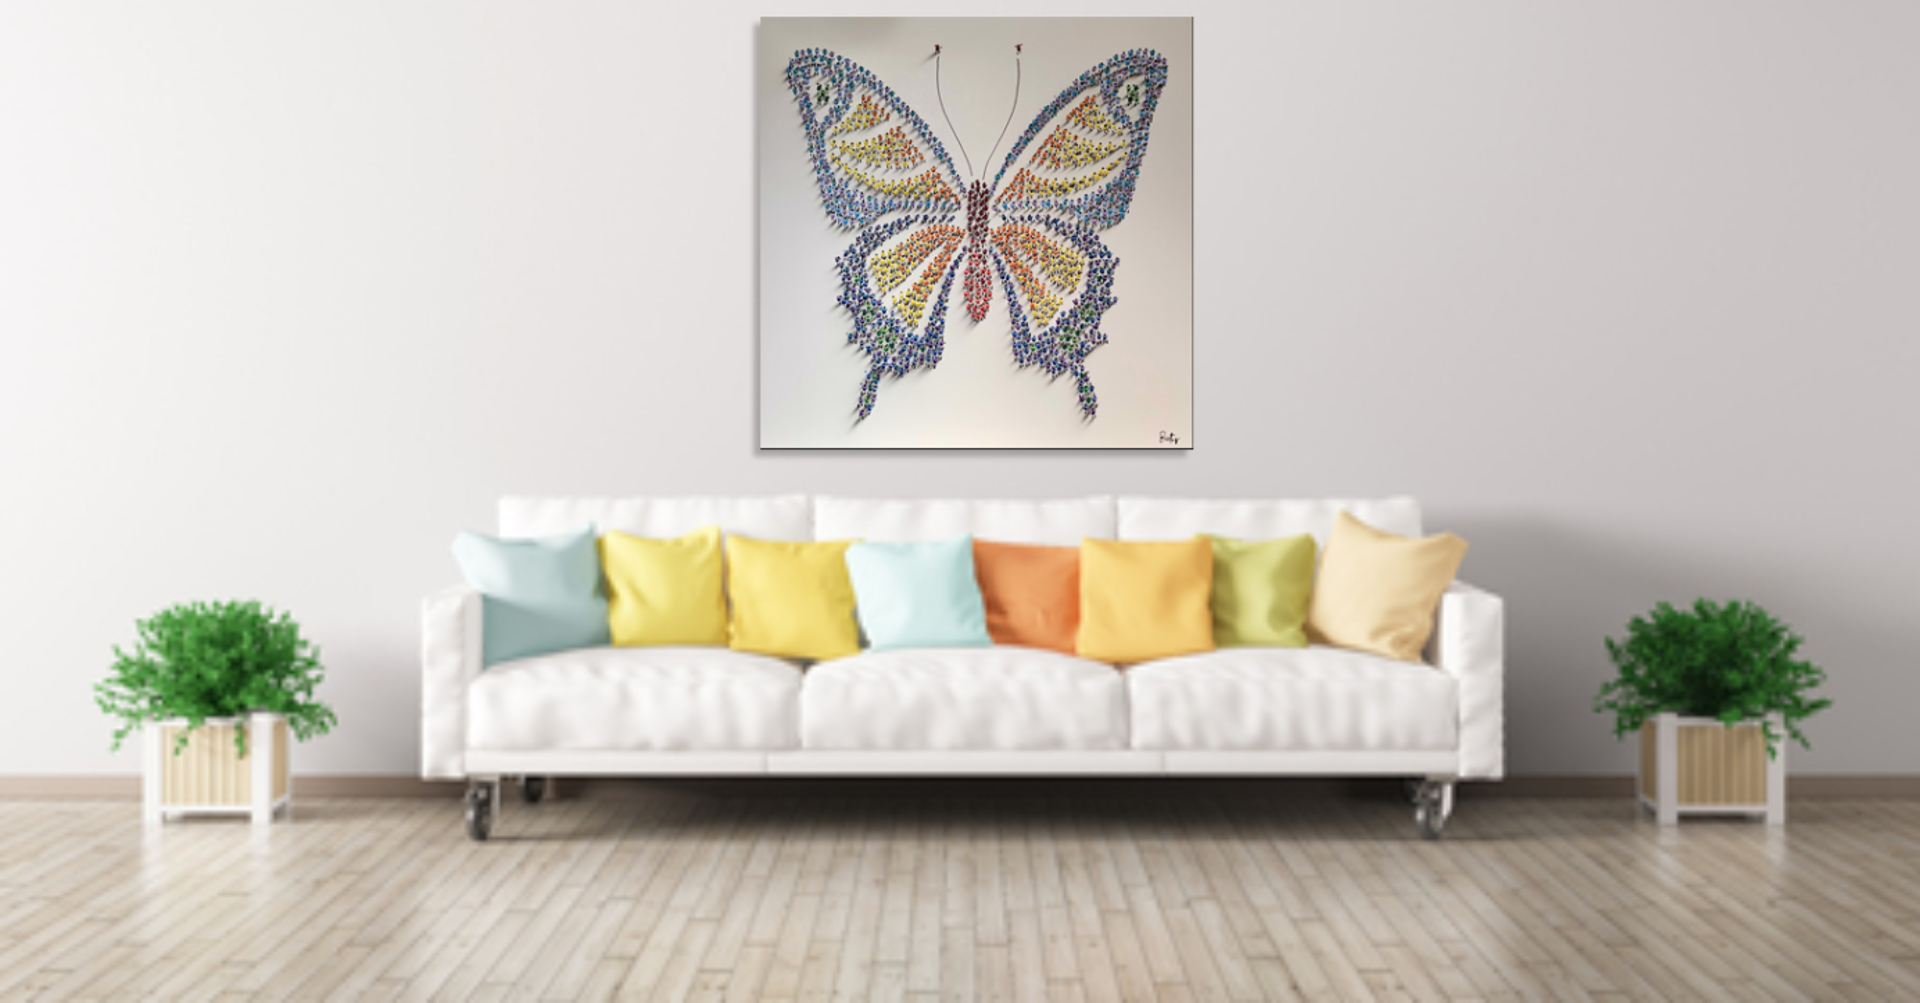 Butterfly I by Francisco Bartus